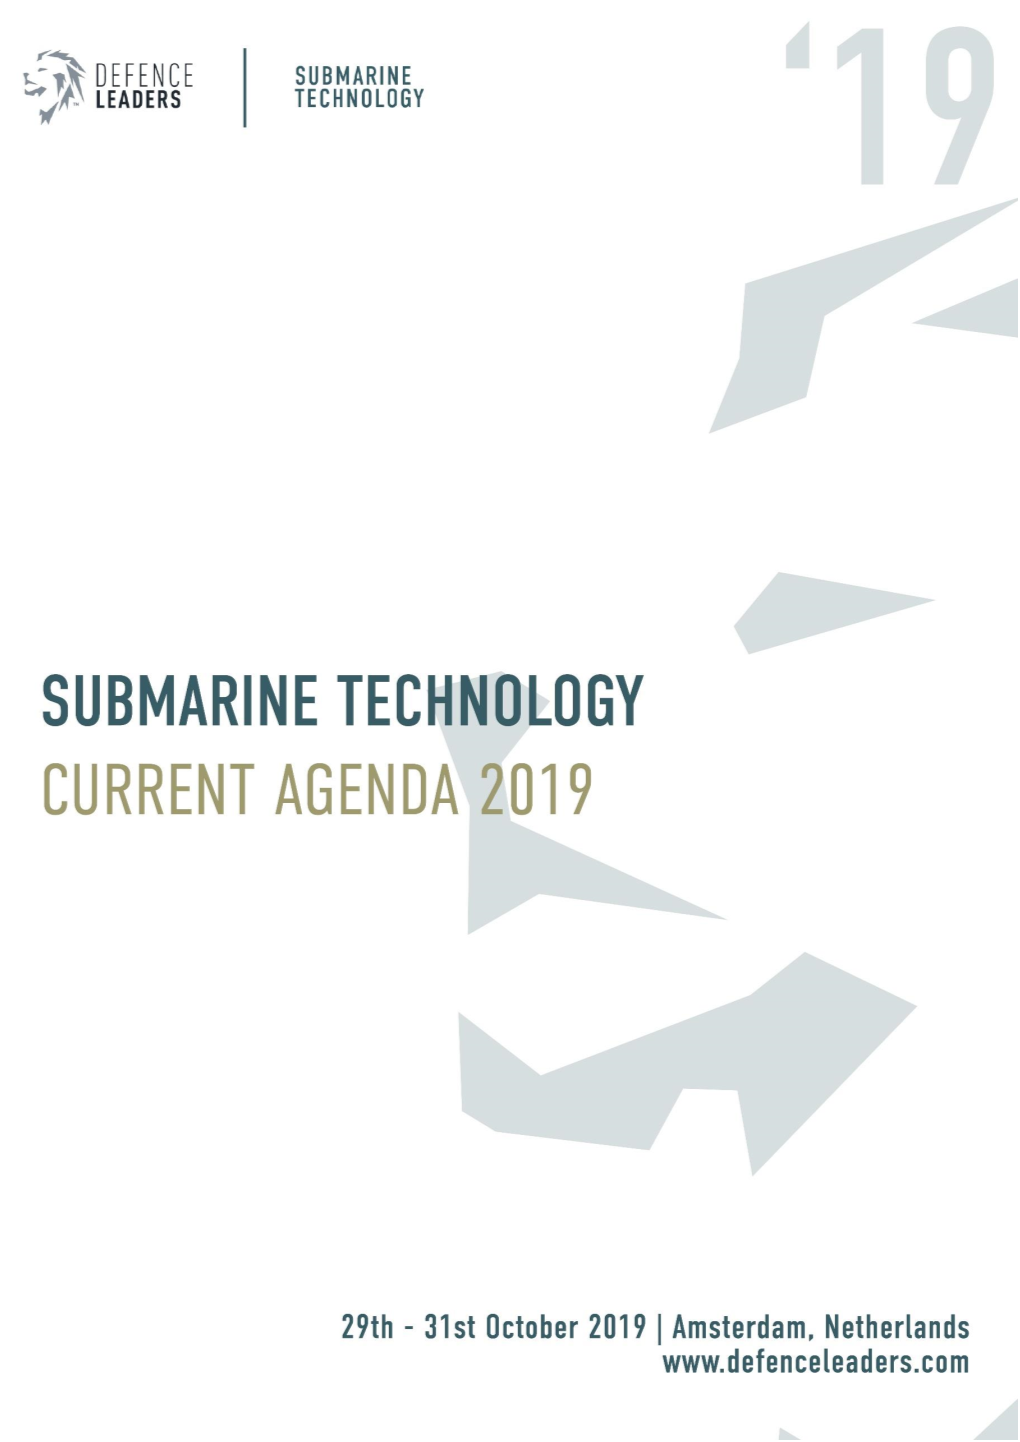 Submarine Technology Conference, Hosted in Amsterdam, the Netherlands